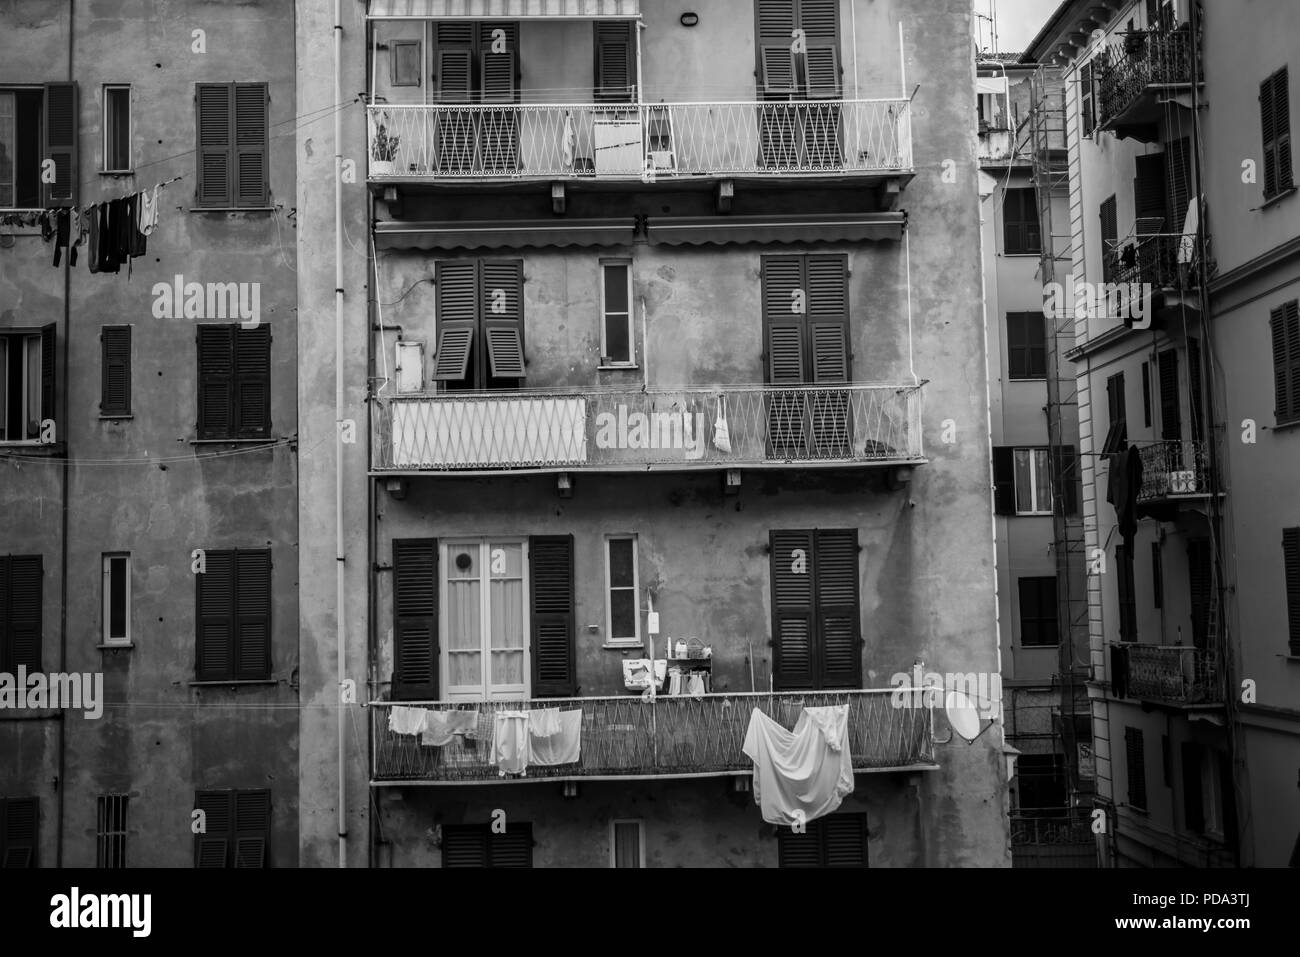 Apartment building in La Spezia, Italy with laundry hanging out to dry. Stock Photo